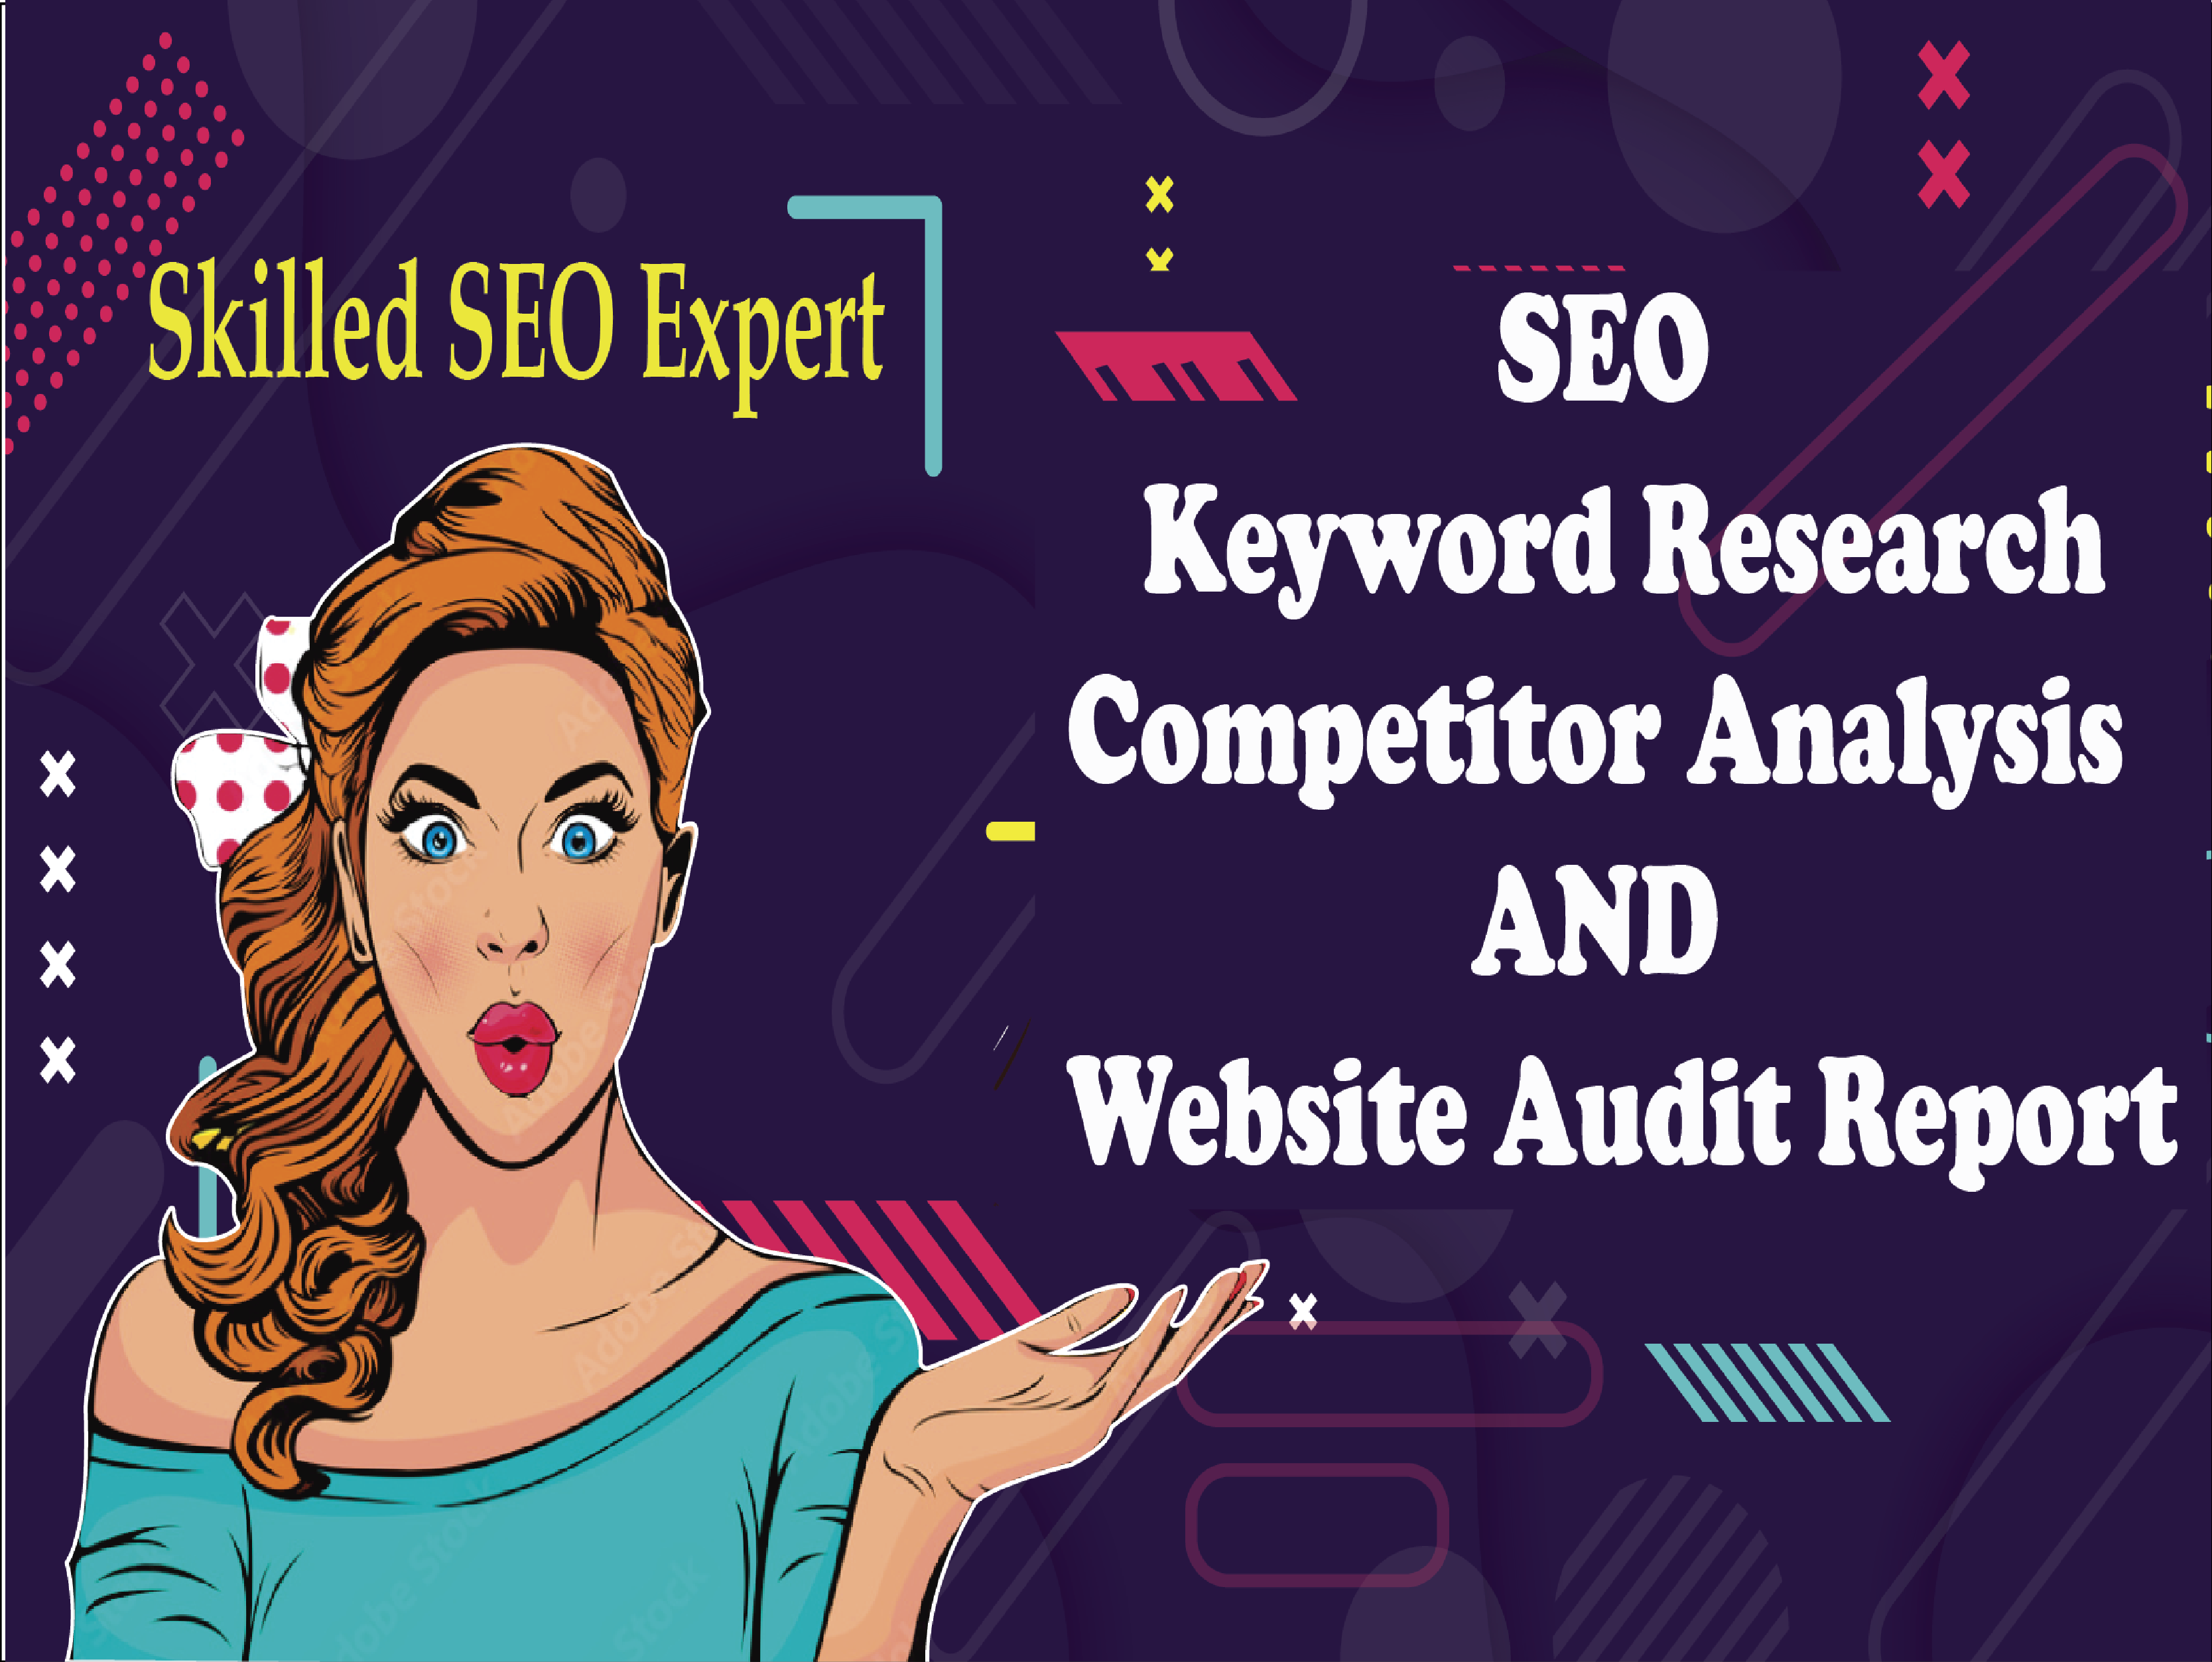 I will do best SEO website audit report, keyword research, competitor analysis and content analysis